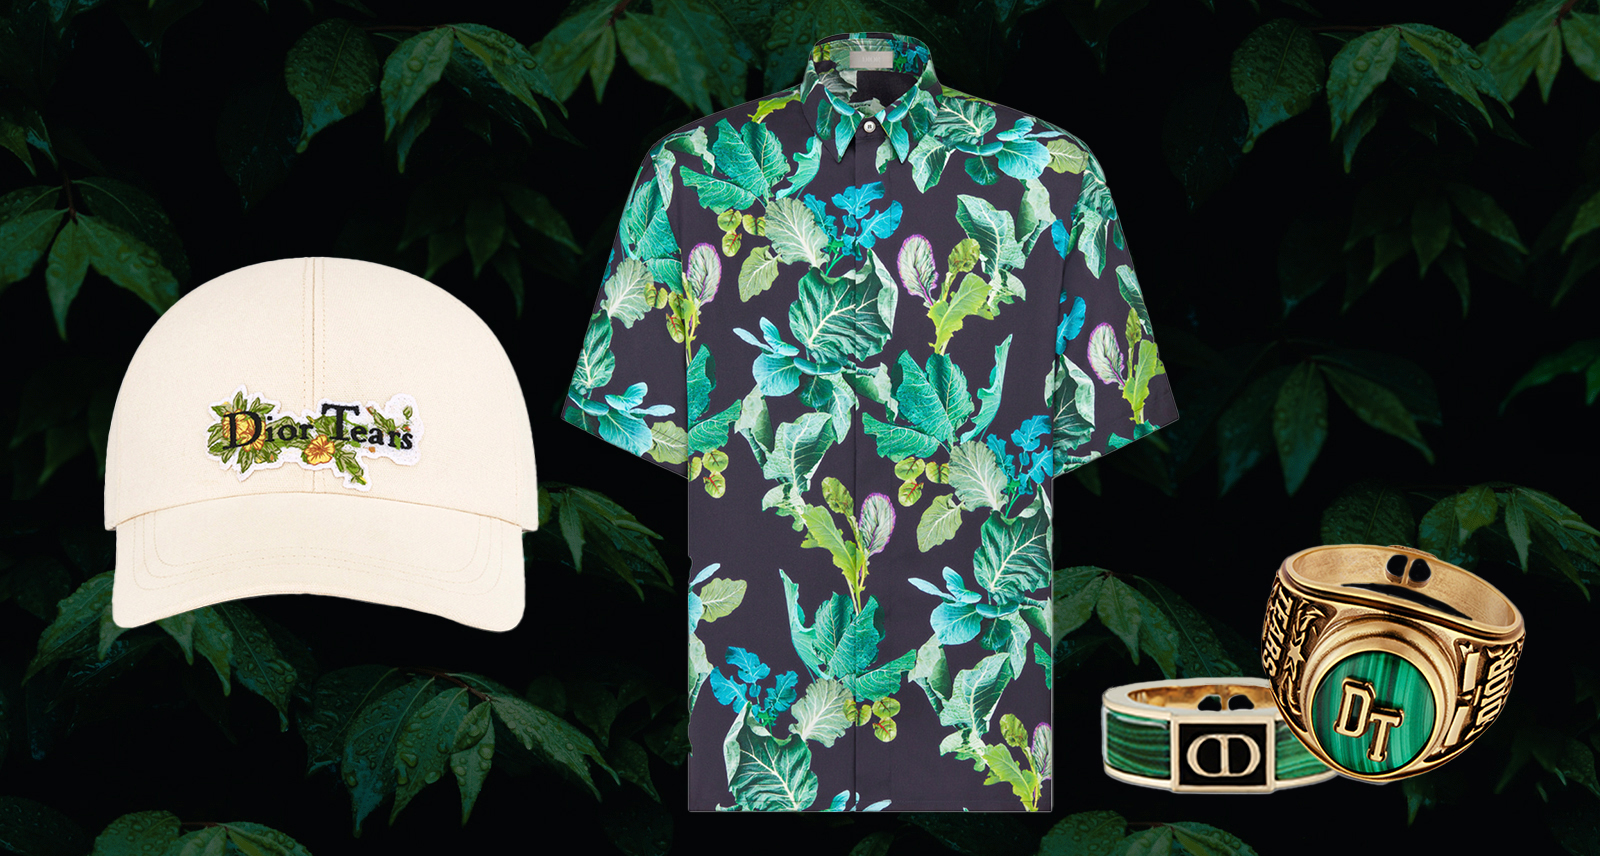 left to right: Dior Tears Cap, Shirt, and two rings in front of background with leaves